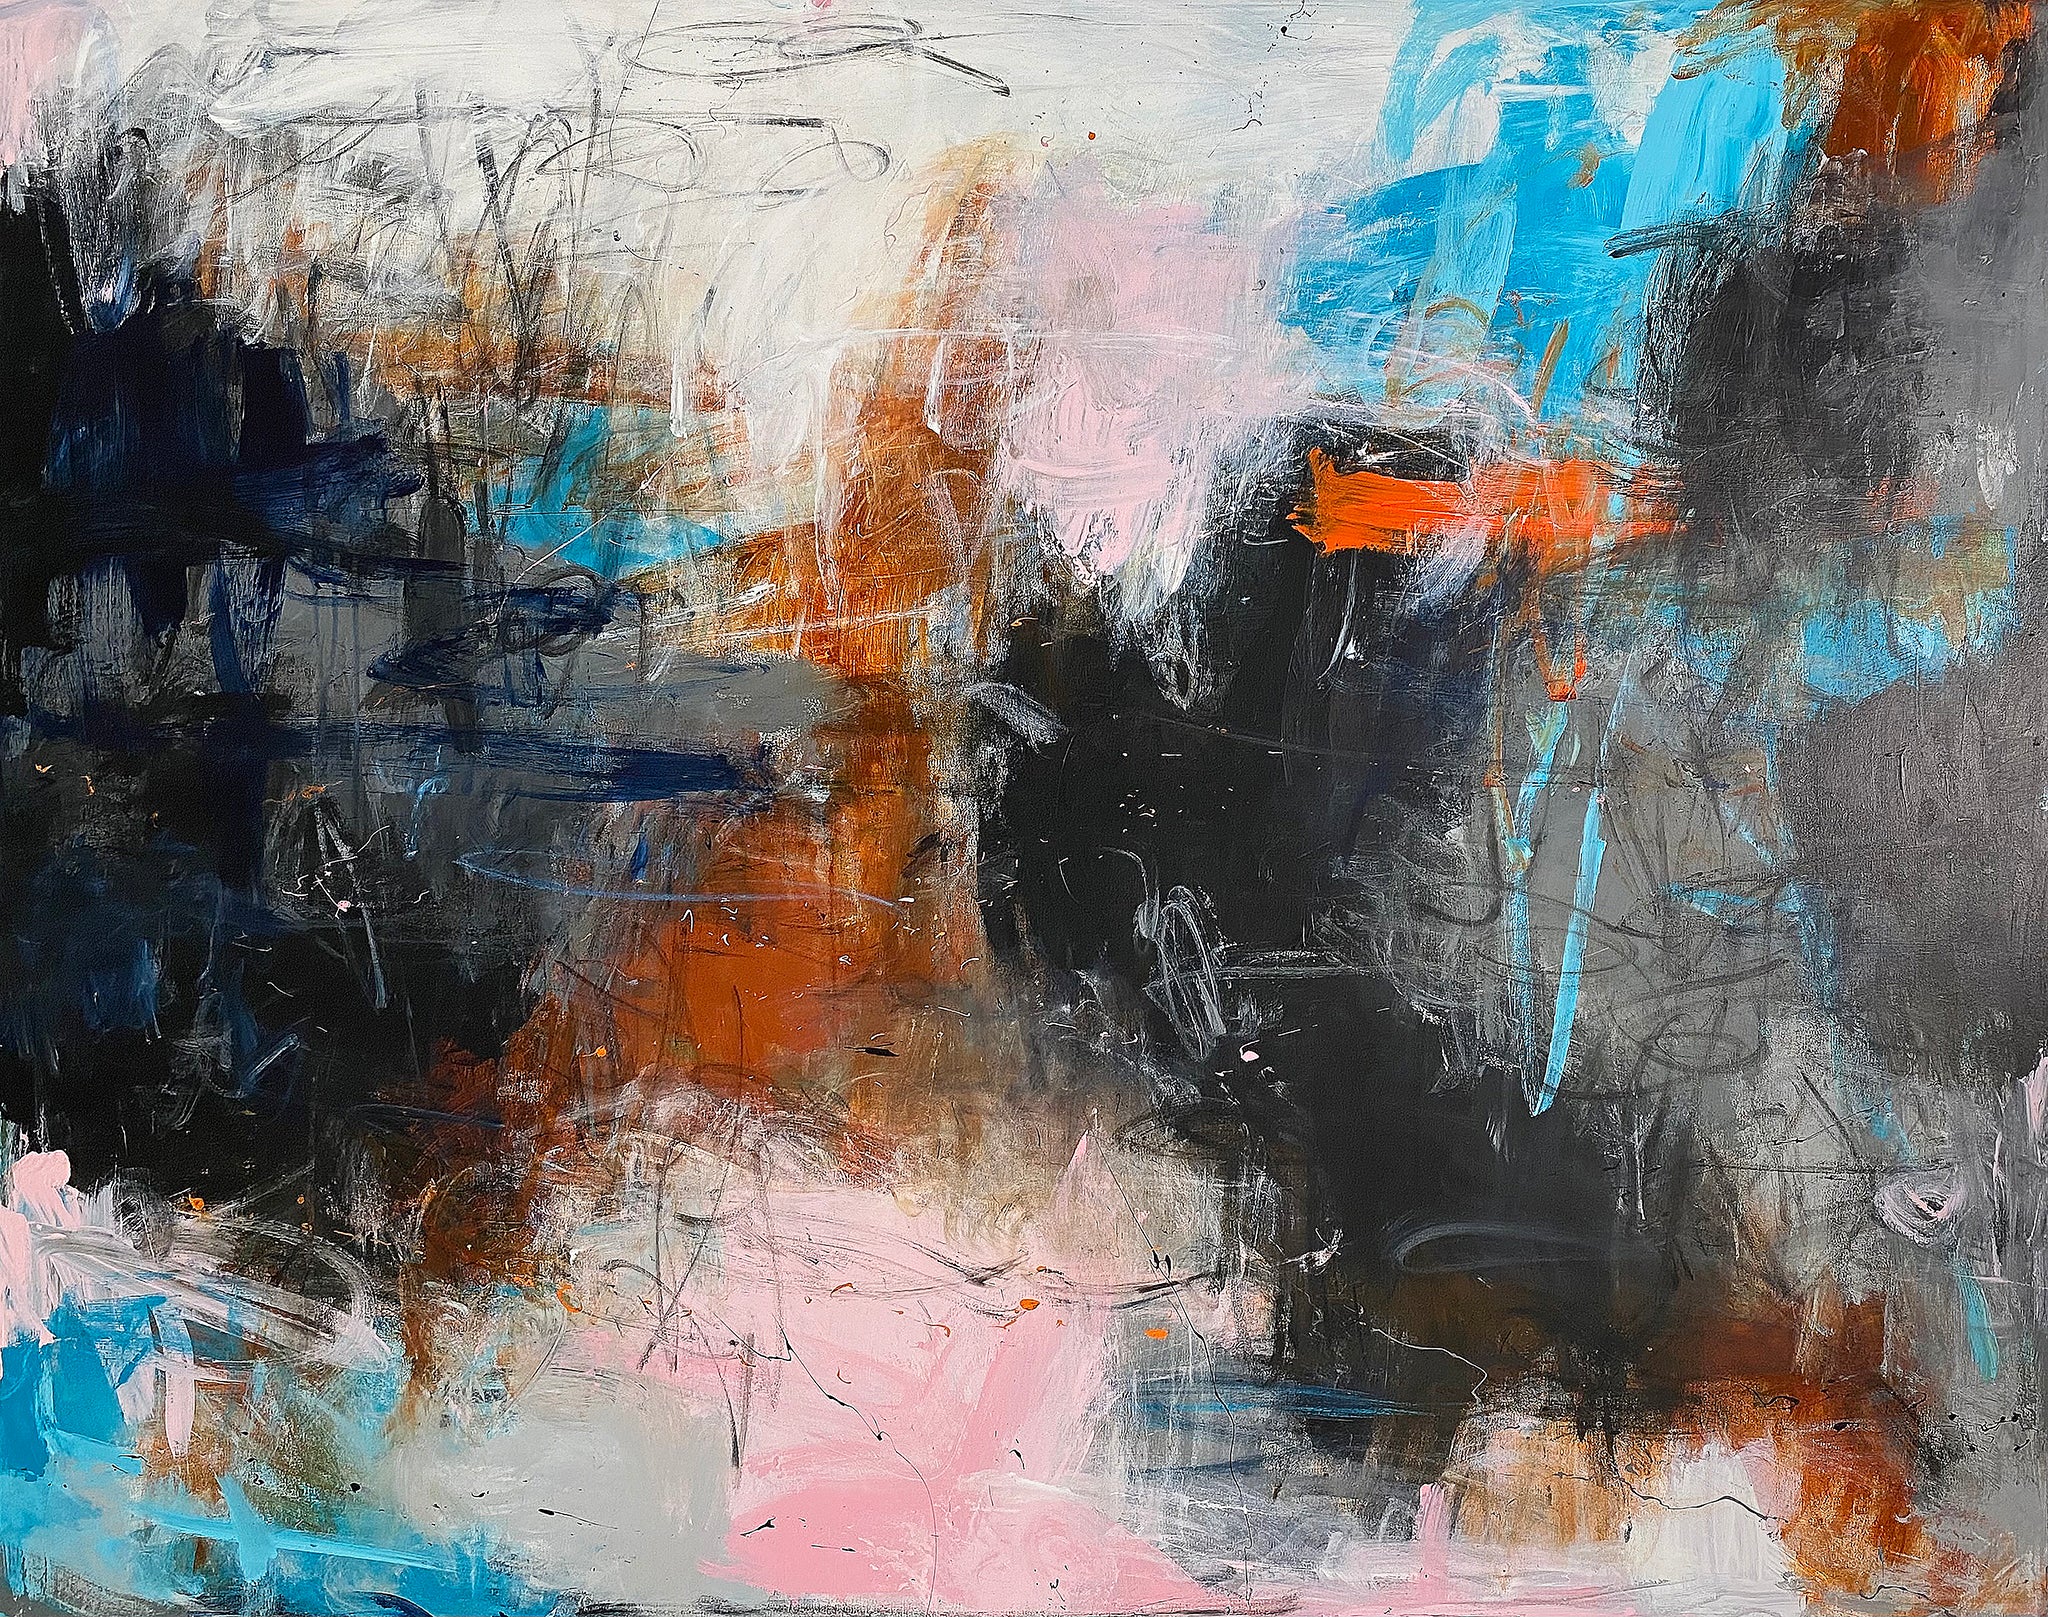 Dancing with the stars 150x120 cm